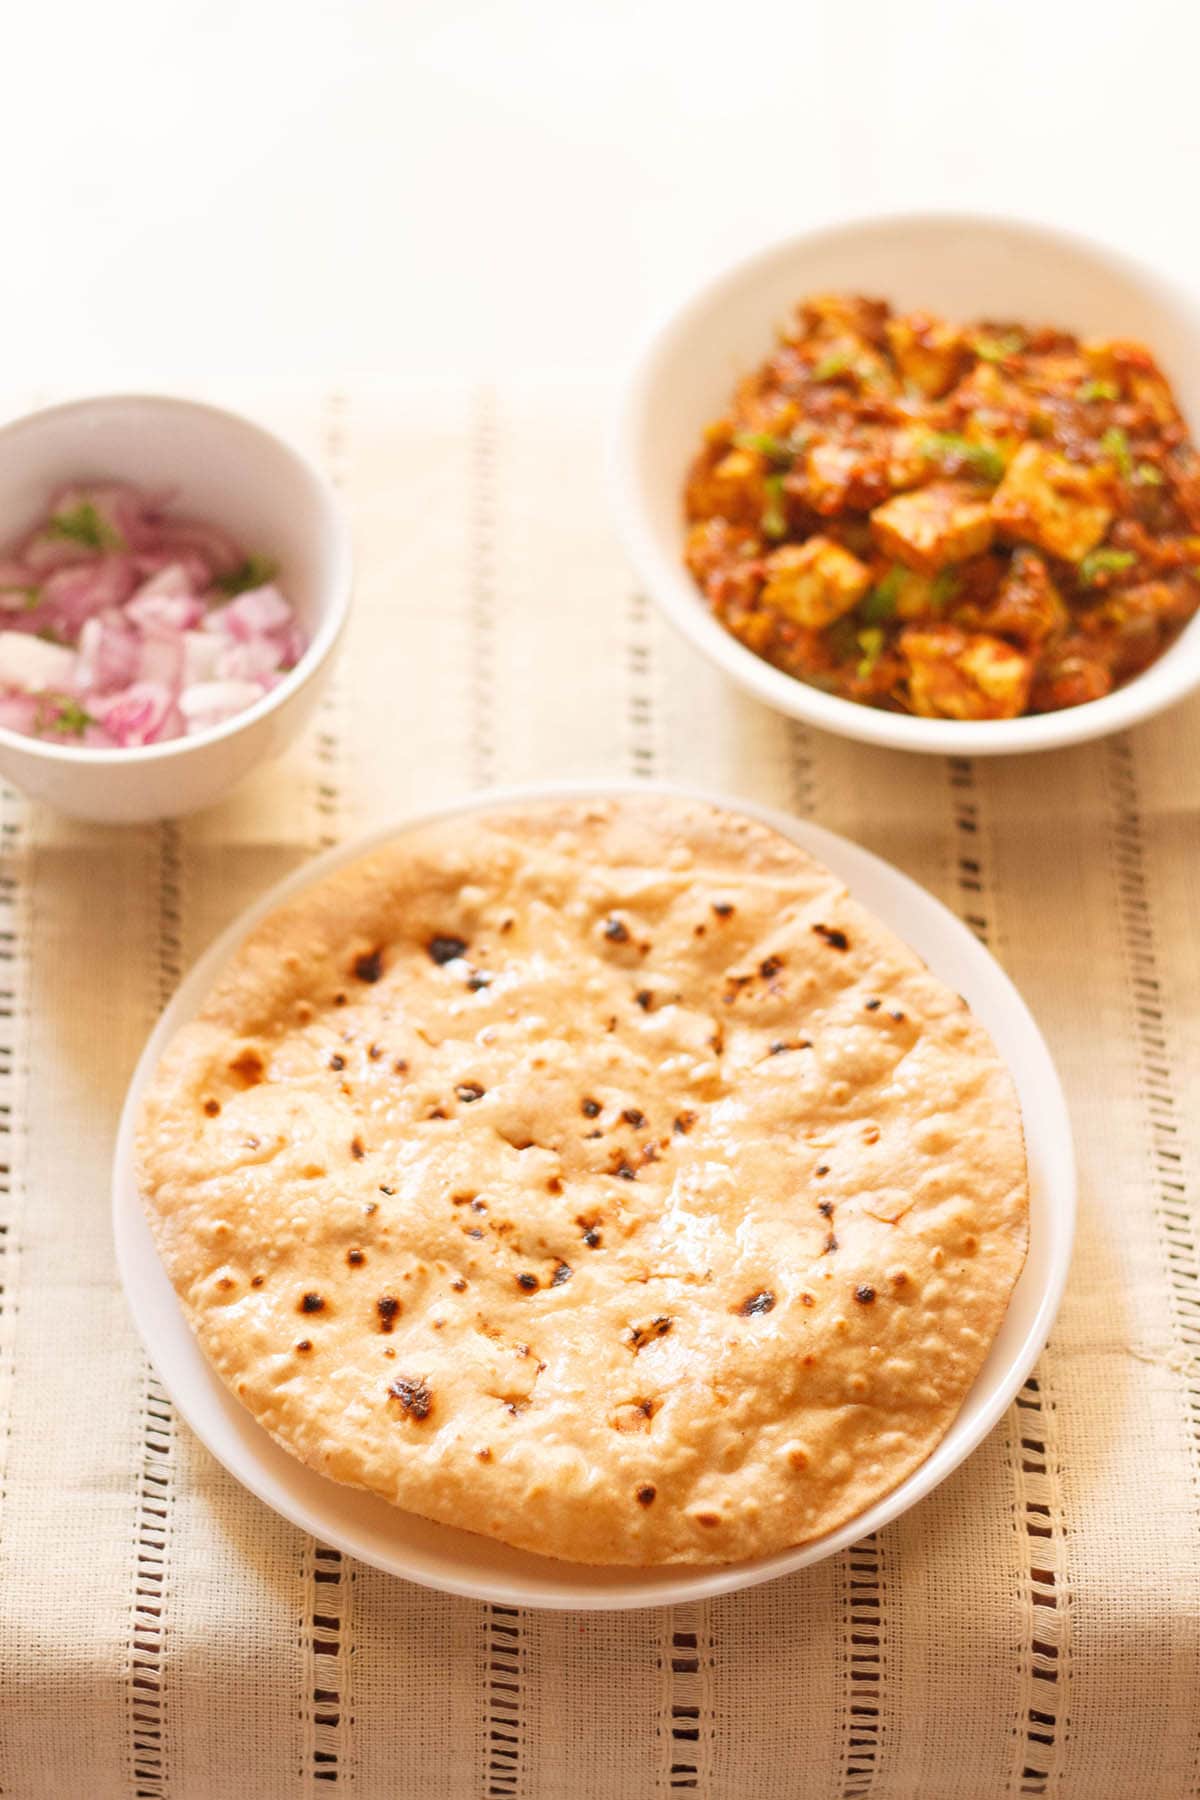 phulka smeared with ghee on a white plate with two white bowls of paneer curry and chopped red onions placed above on a cream cotton fabric